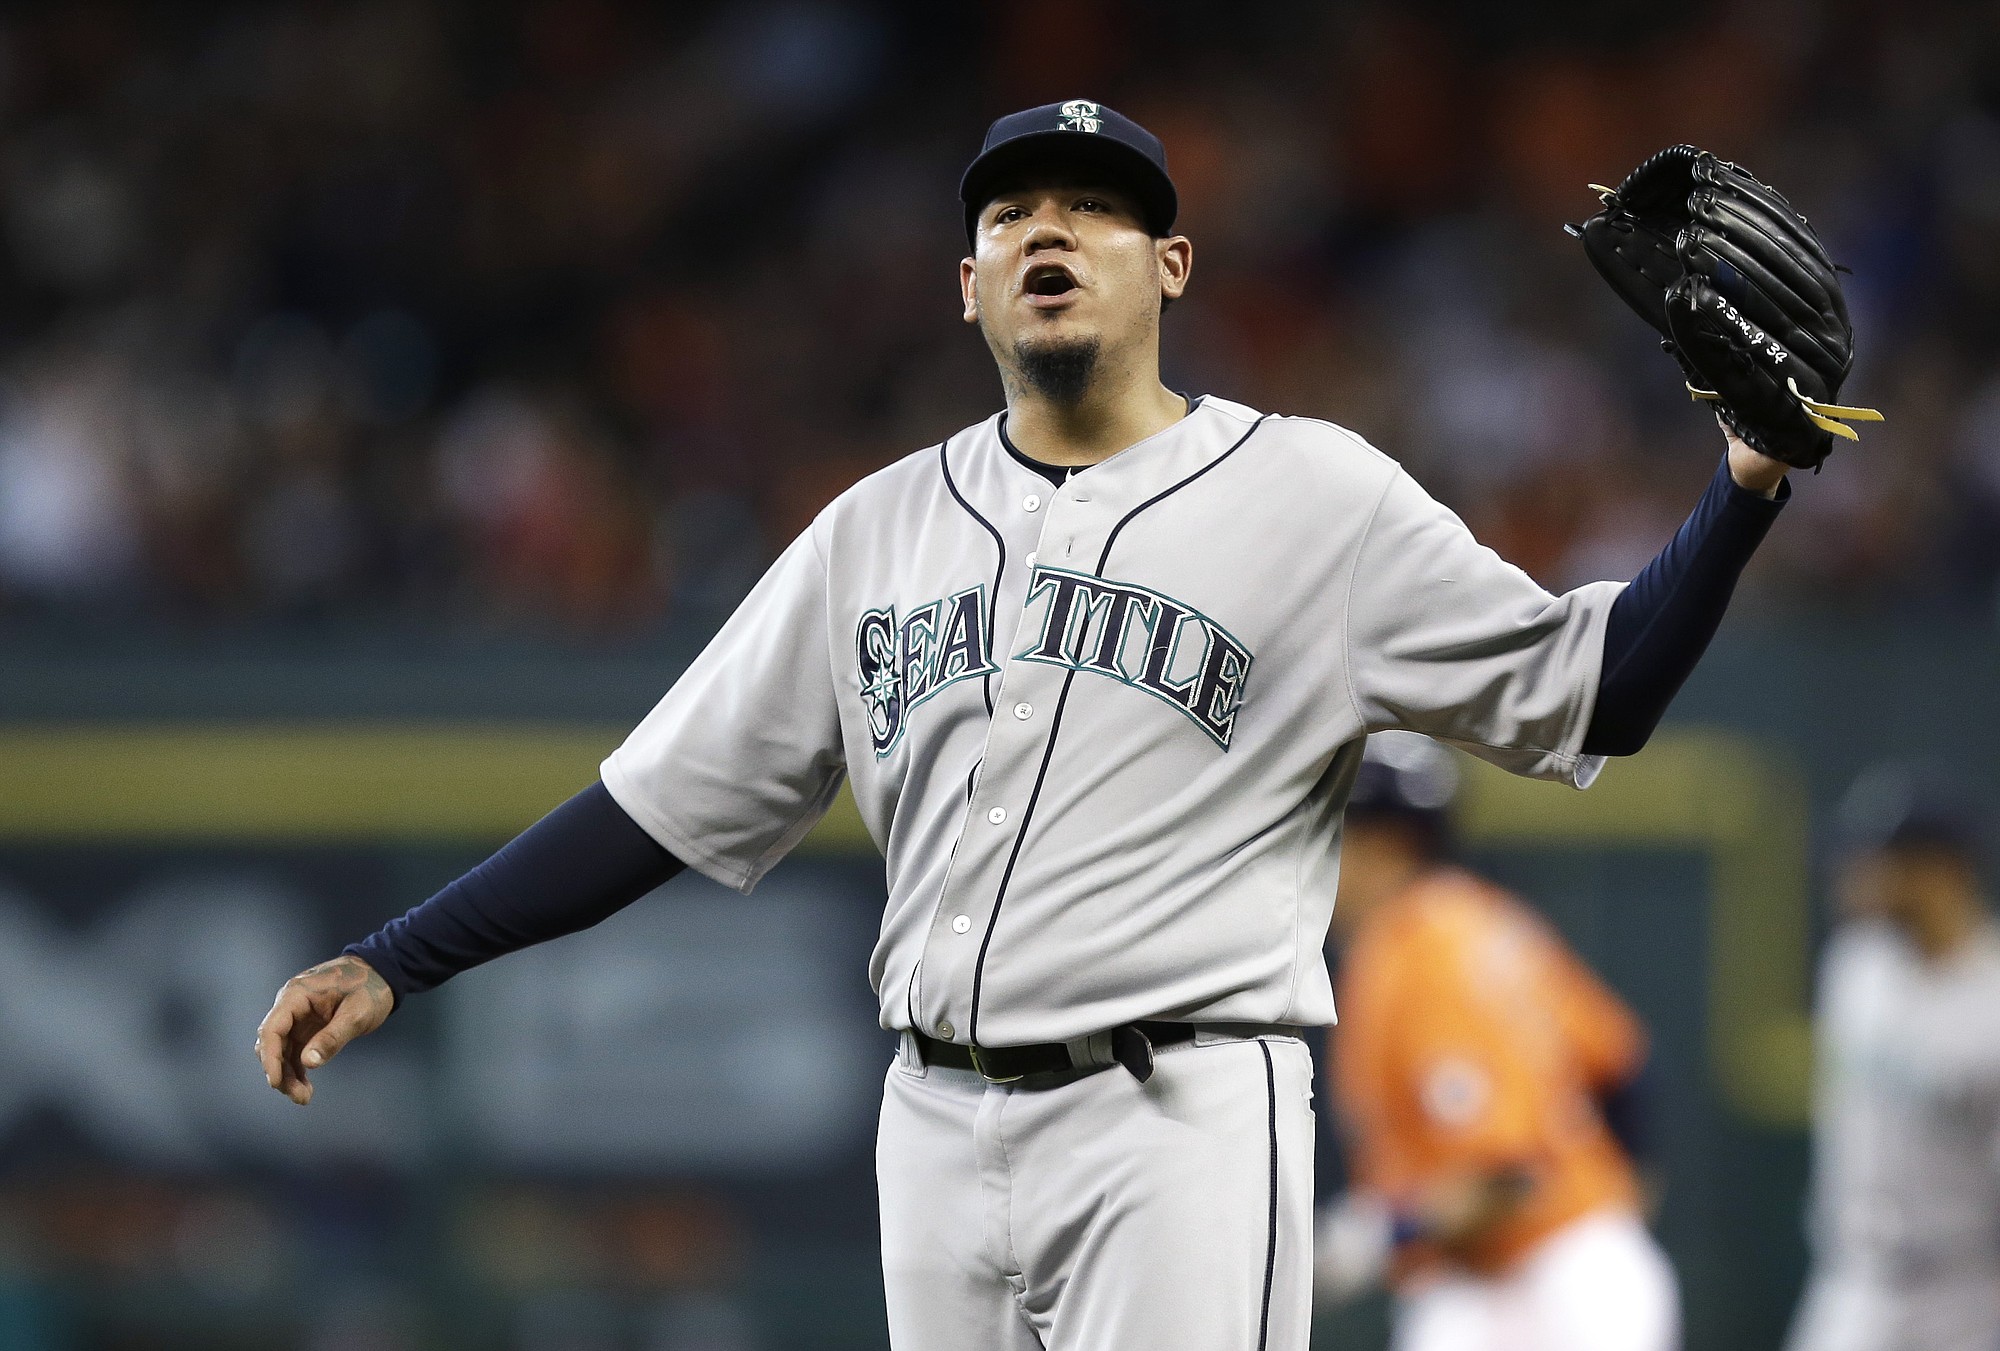 Seattle Mariners starting pitcher Felix Hernandez yells as Houston Astros' Jason Castro, background, rounds the bases on a two-run home run during the first inning Friday, June 12, 2015, in Houston. Hernandez pitched one-third inning giving up five hits and eight runs.